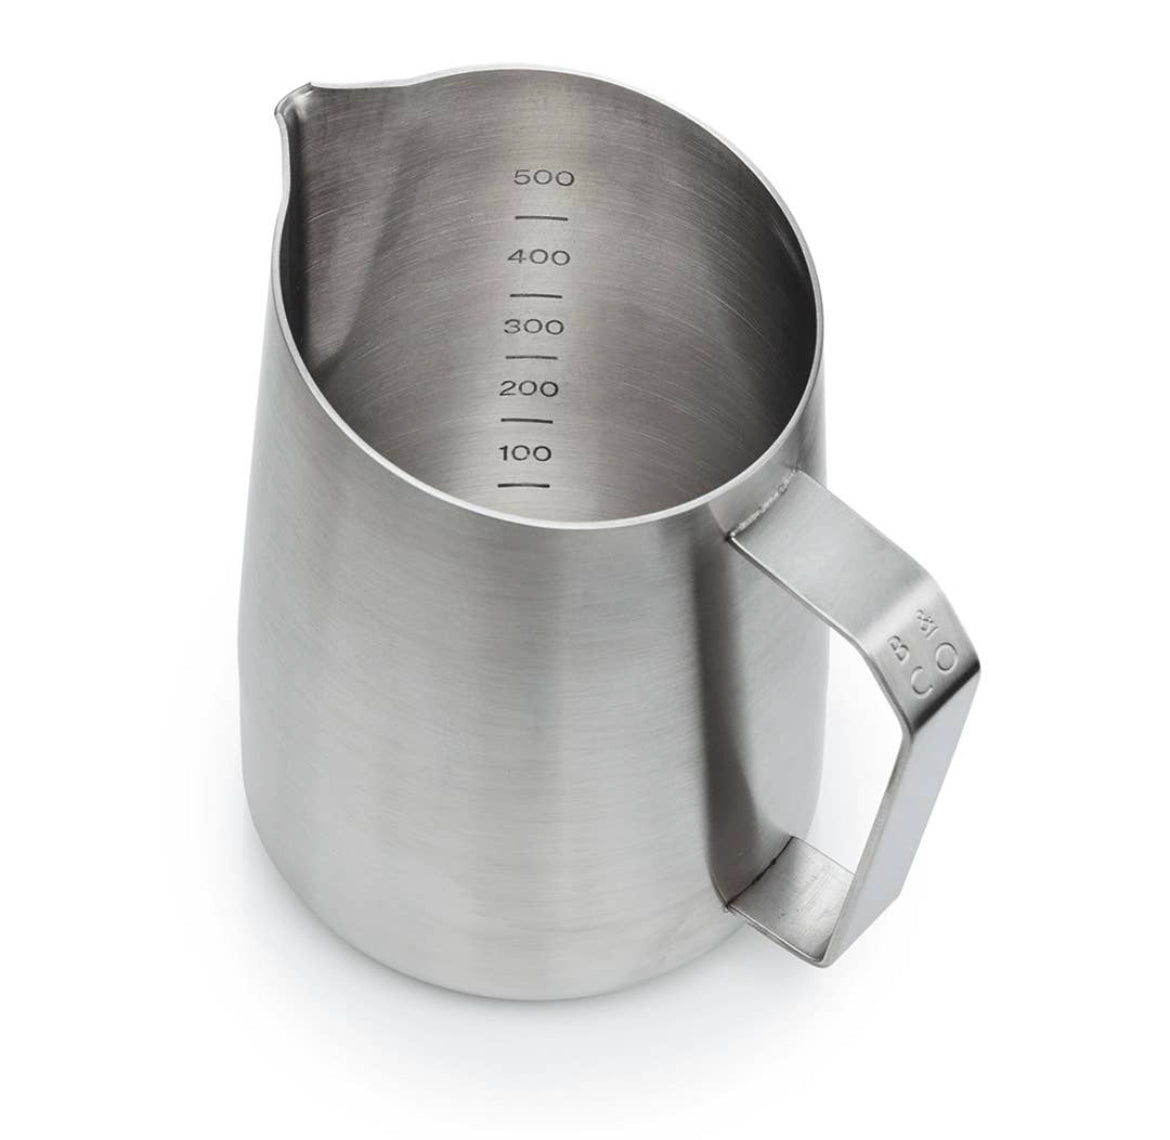 Dial In Milk Pitcher - Stainless Steel - 600 ml - Coffee Coaching Club